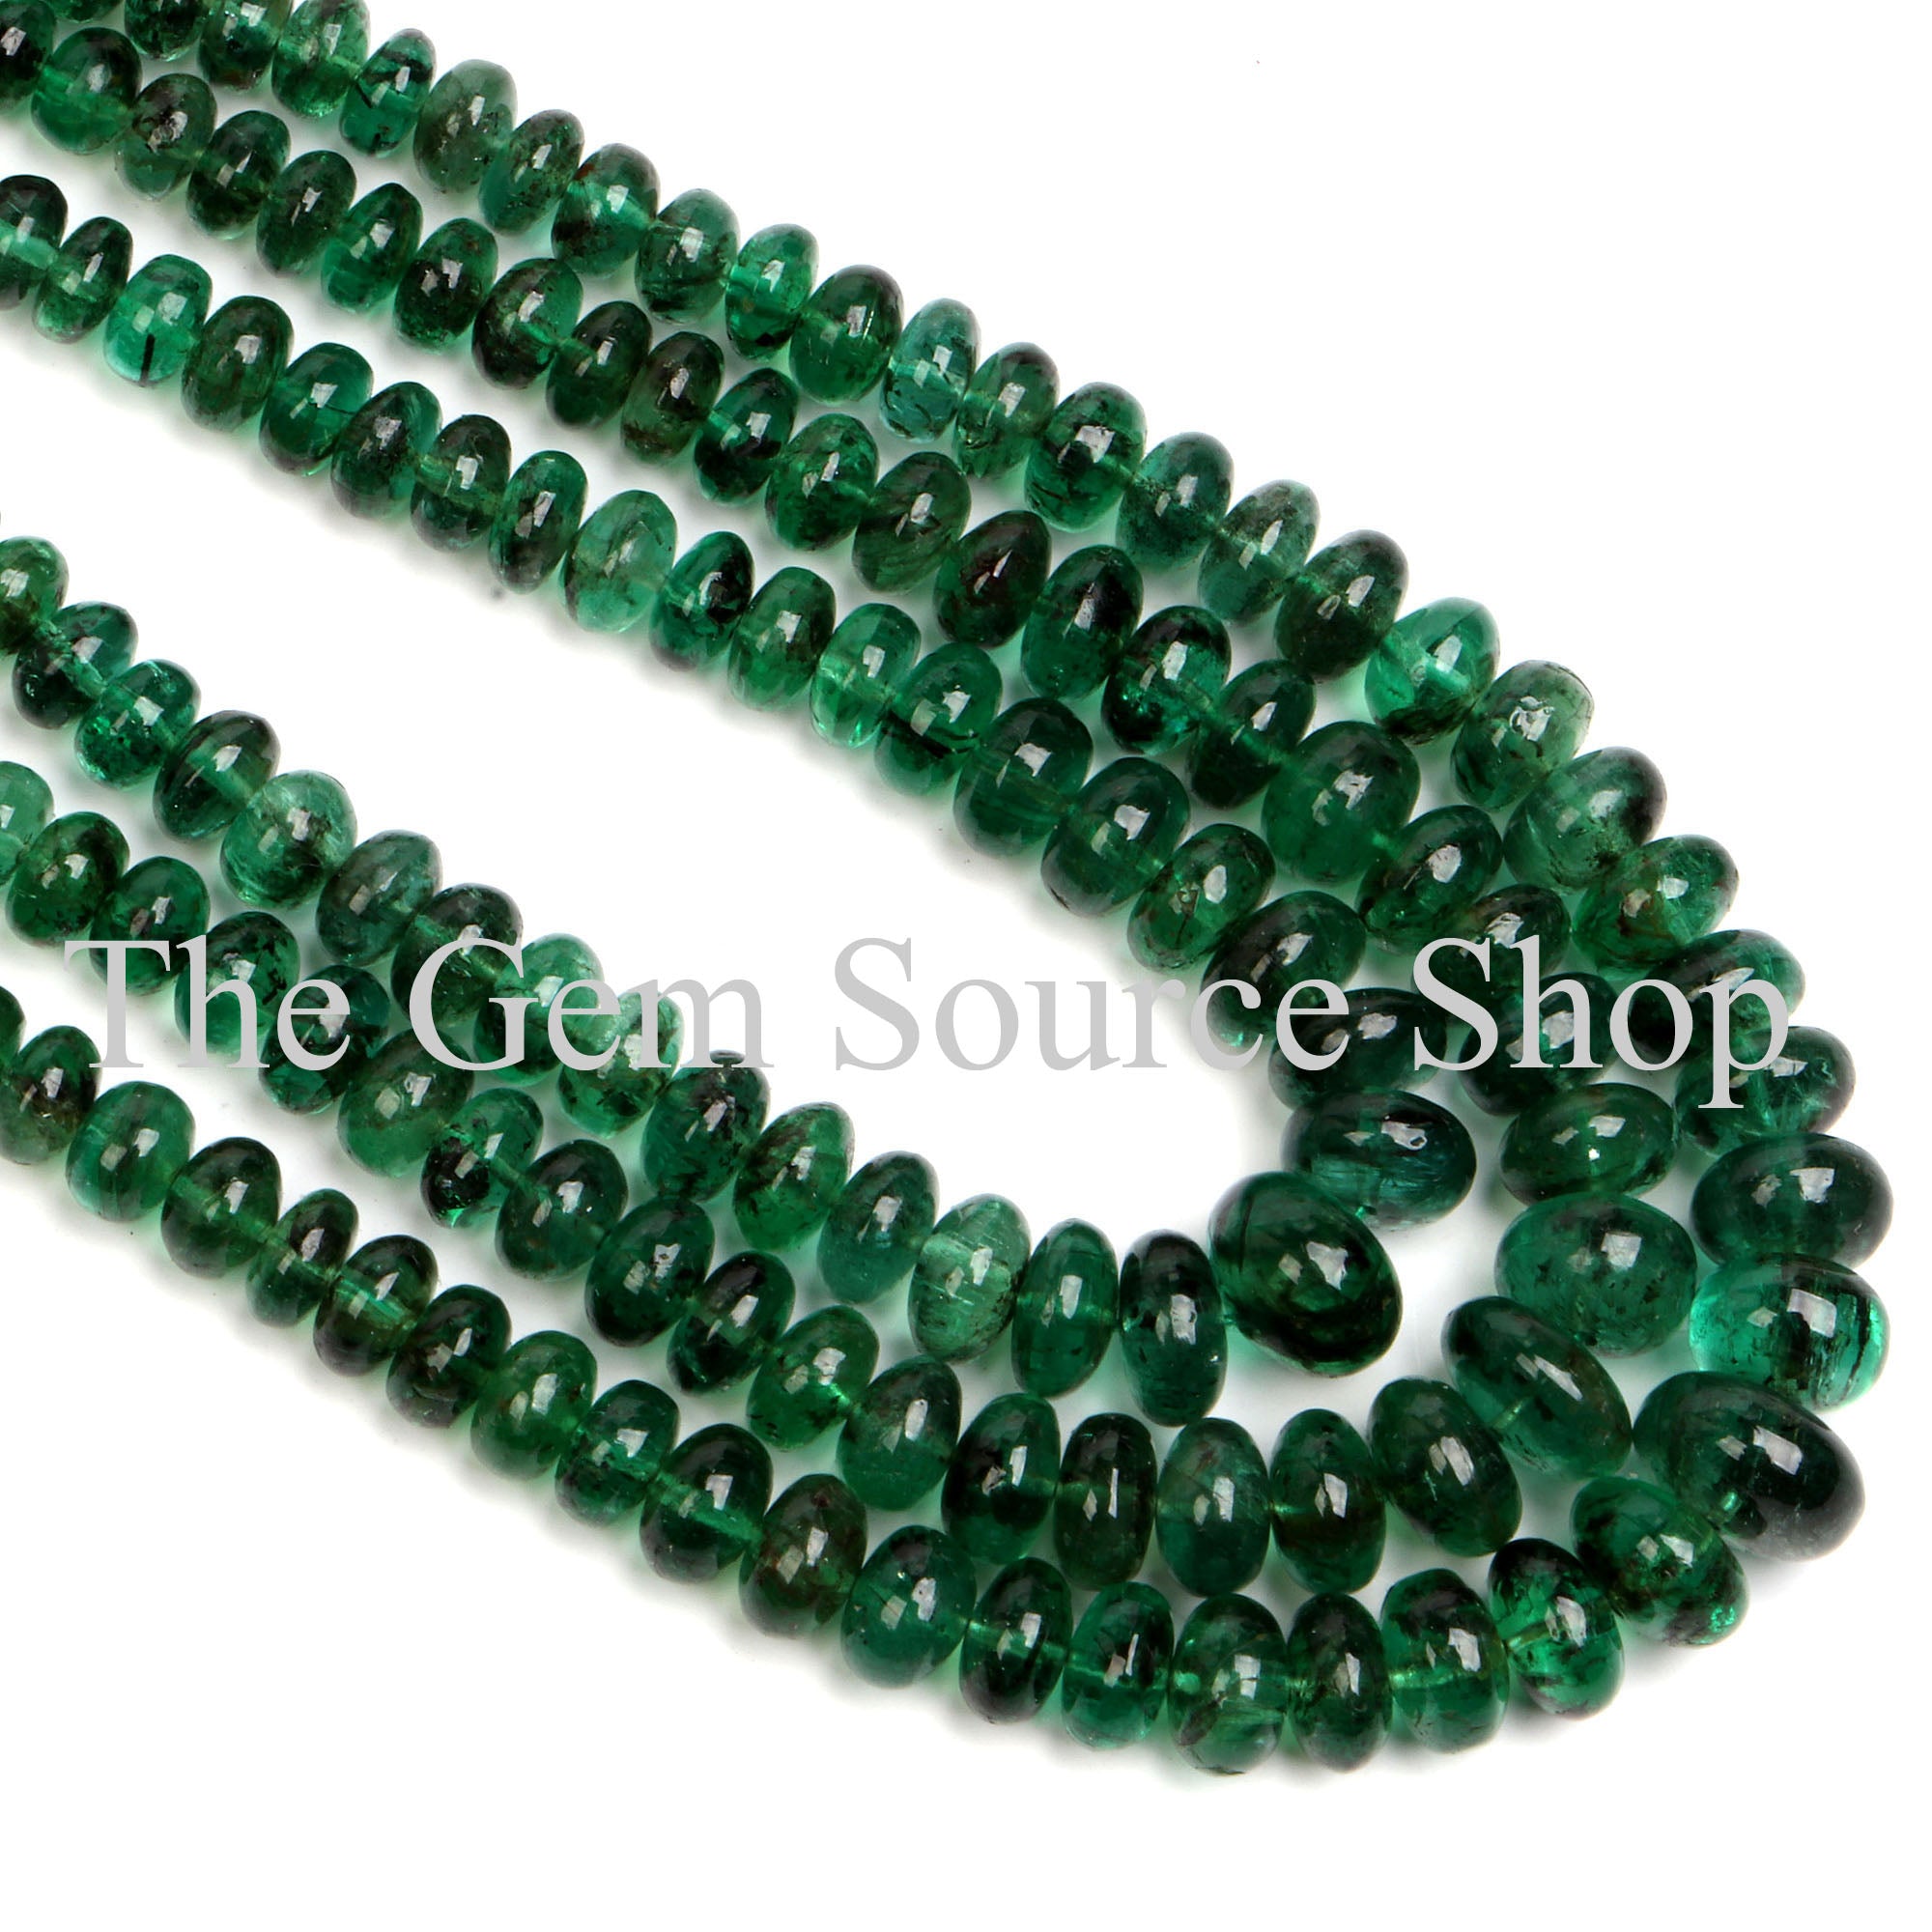 Emerald Necklace, Emerald Smooth Necklace, Emerald Rondelle Necklace, Emerald Gemstone Necklace, Emerald Beaded Necklace